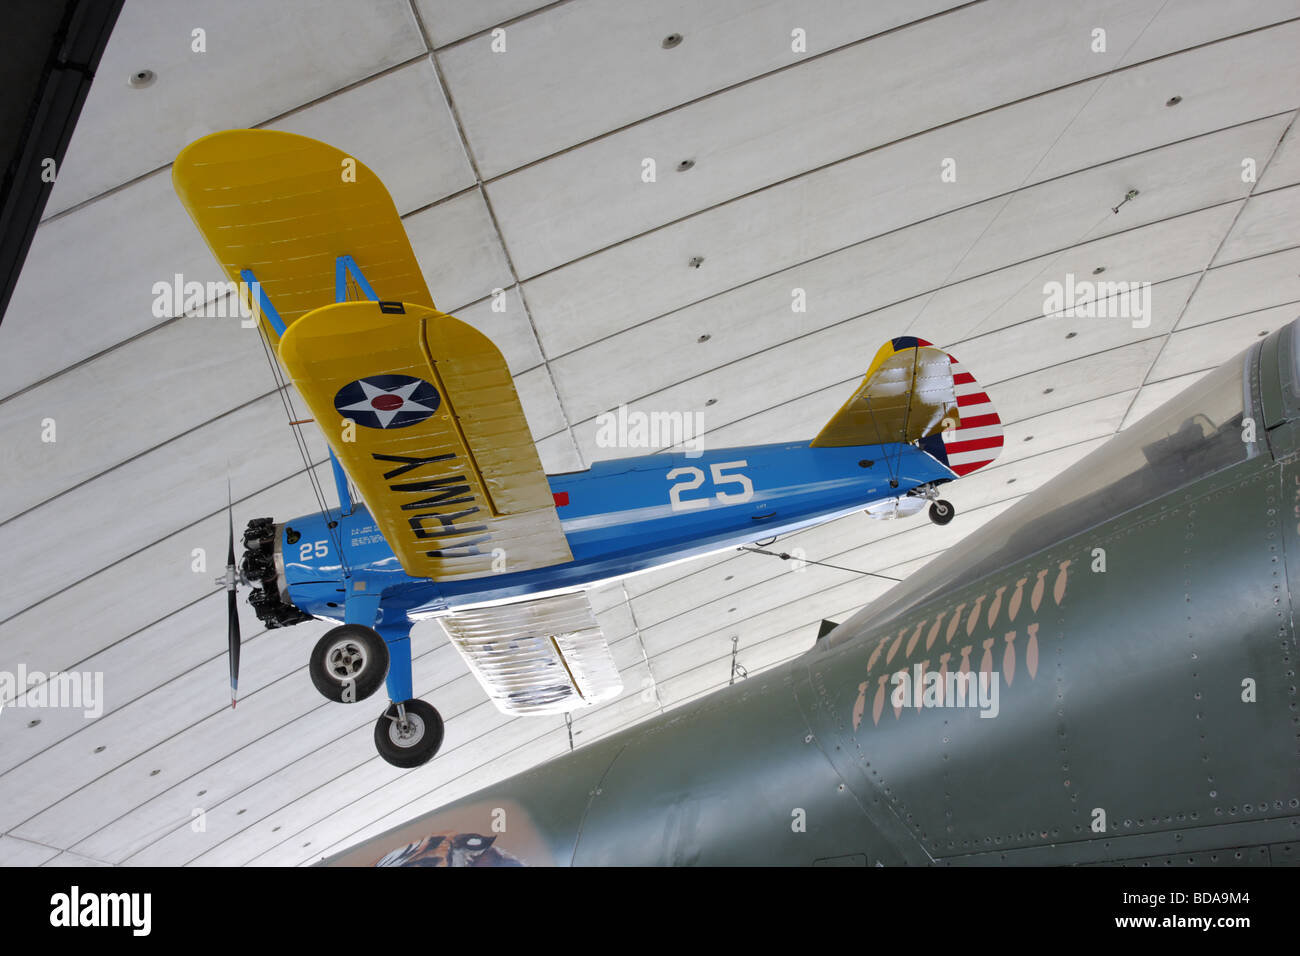 In blue and yellow livery the Stearman PT-17 Kaydet and the cockpit of the General Dynamics F-111E multi-role jet fighter. Stock Photo